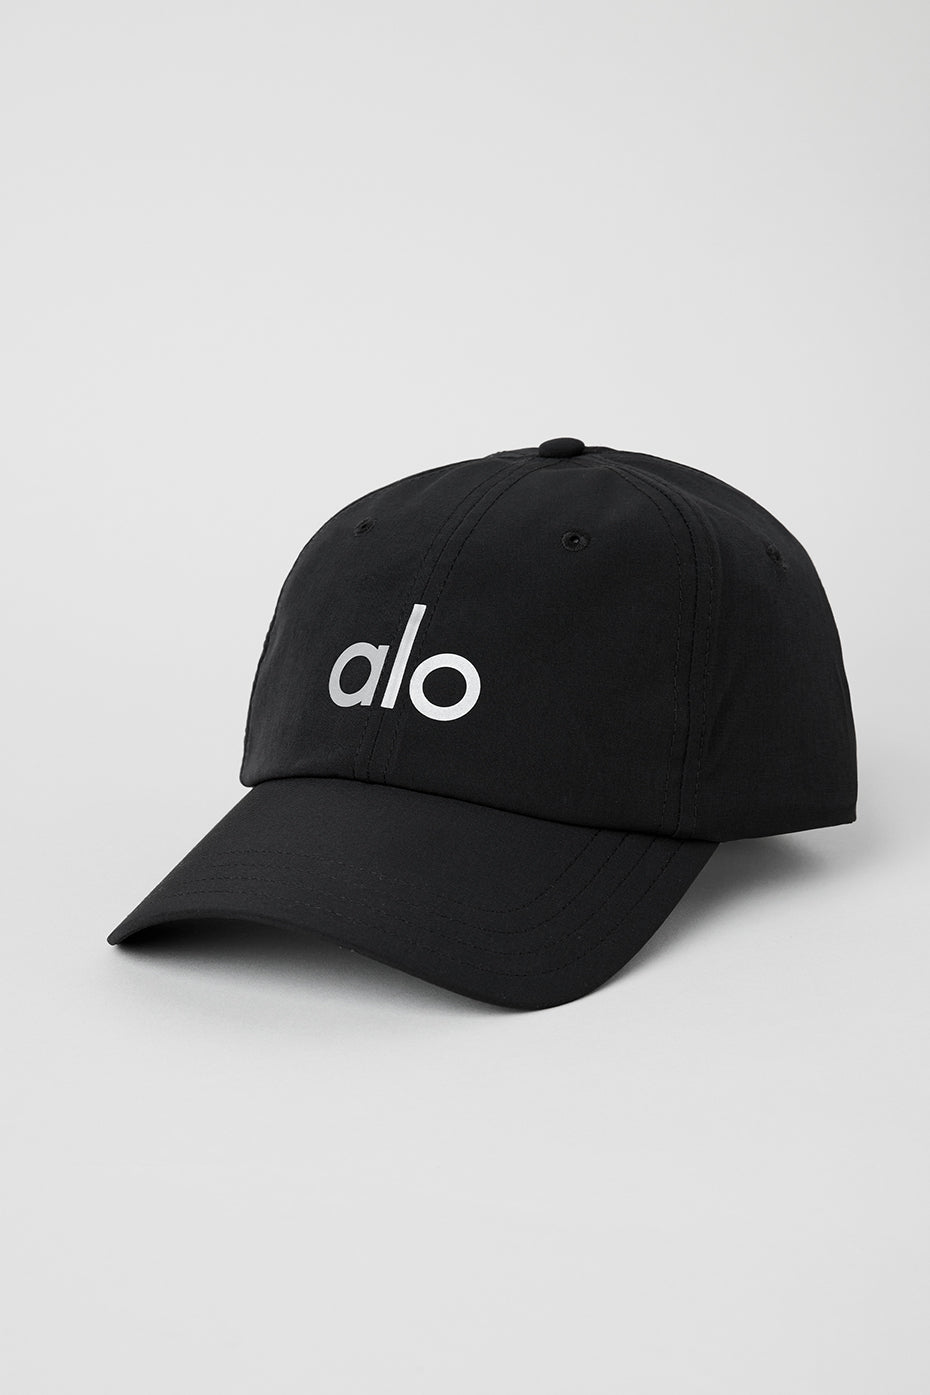 Alo Clothing, Shop The Largest Collection